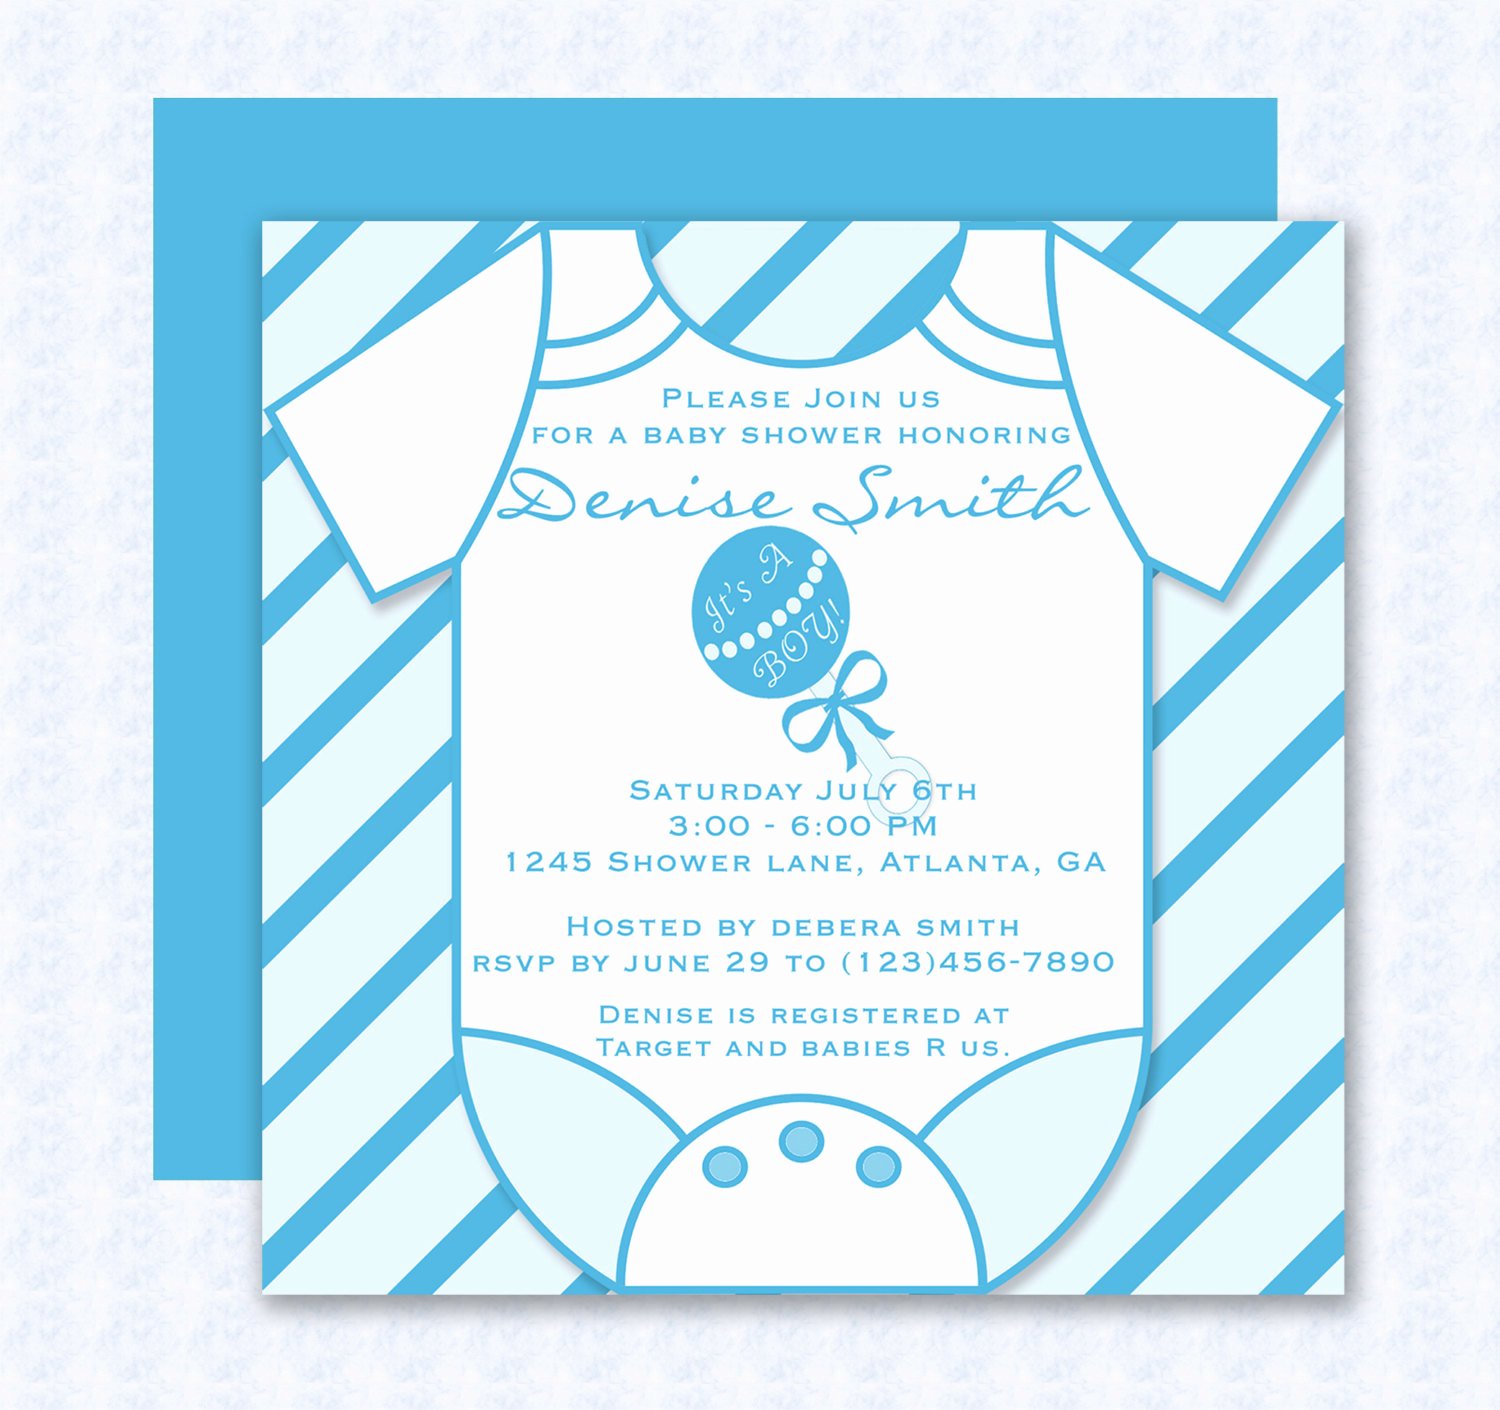 Printable Baby Shower Invitation Template Lovely Blue Esie Baby Shower Invitation Editable Template